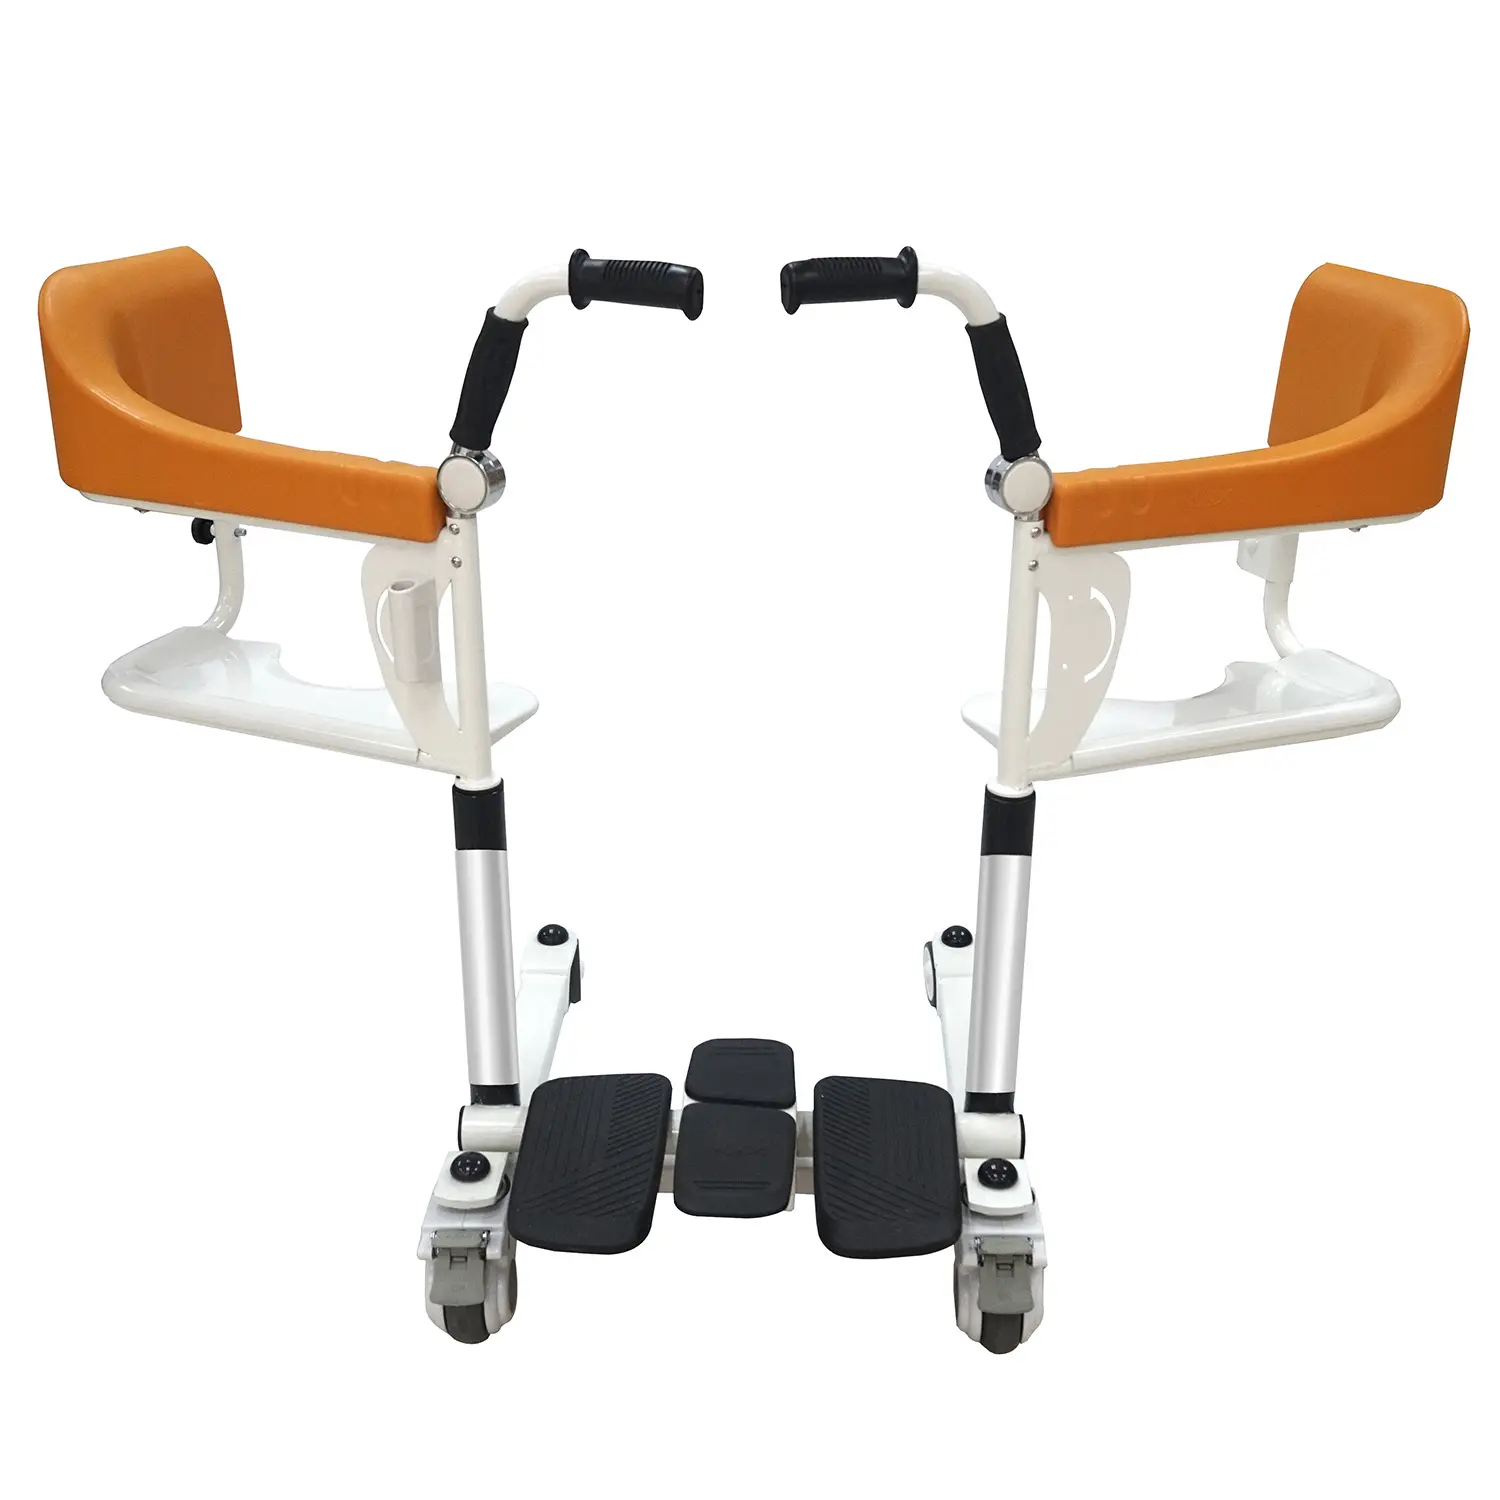 2023 New Disabled Patient Lifting Nursing Commode Chair Handbuch Patienten transfer lifts tuhl mit Rad